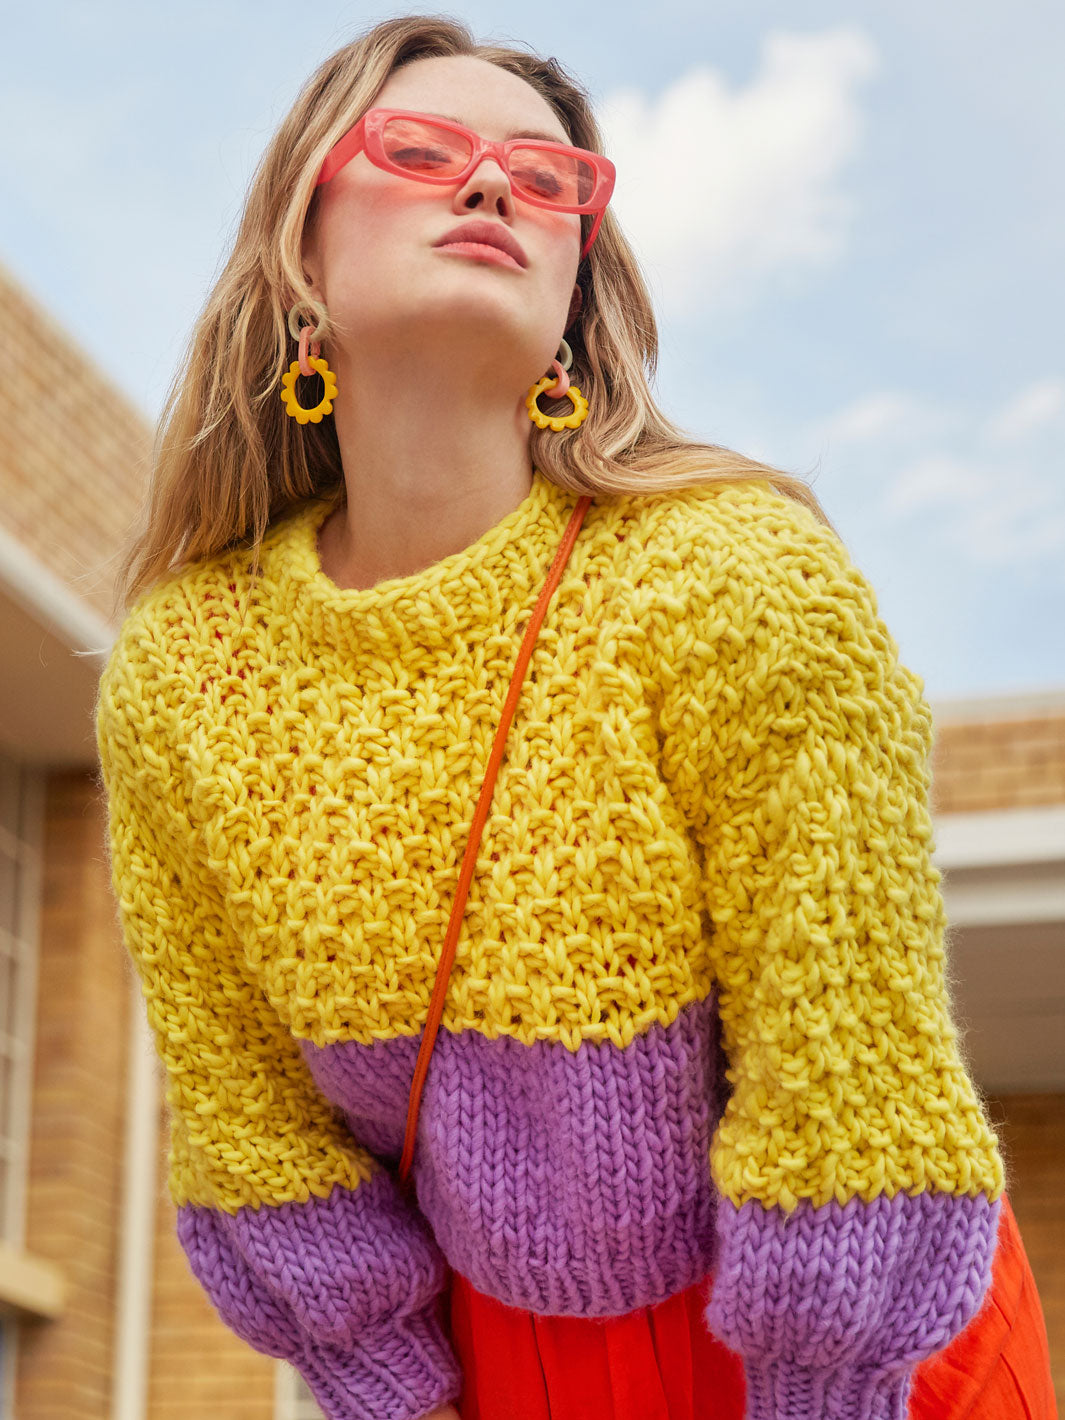 Girl wearing sunglasses leans over in her chunky knitted bright colour jumper